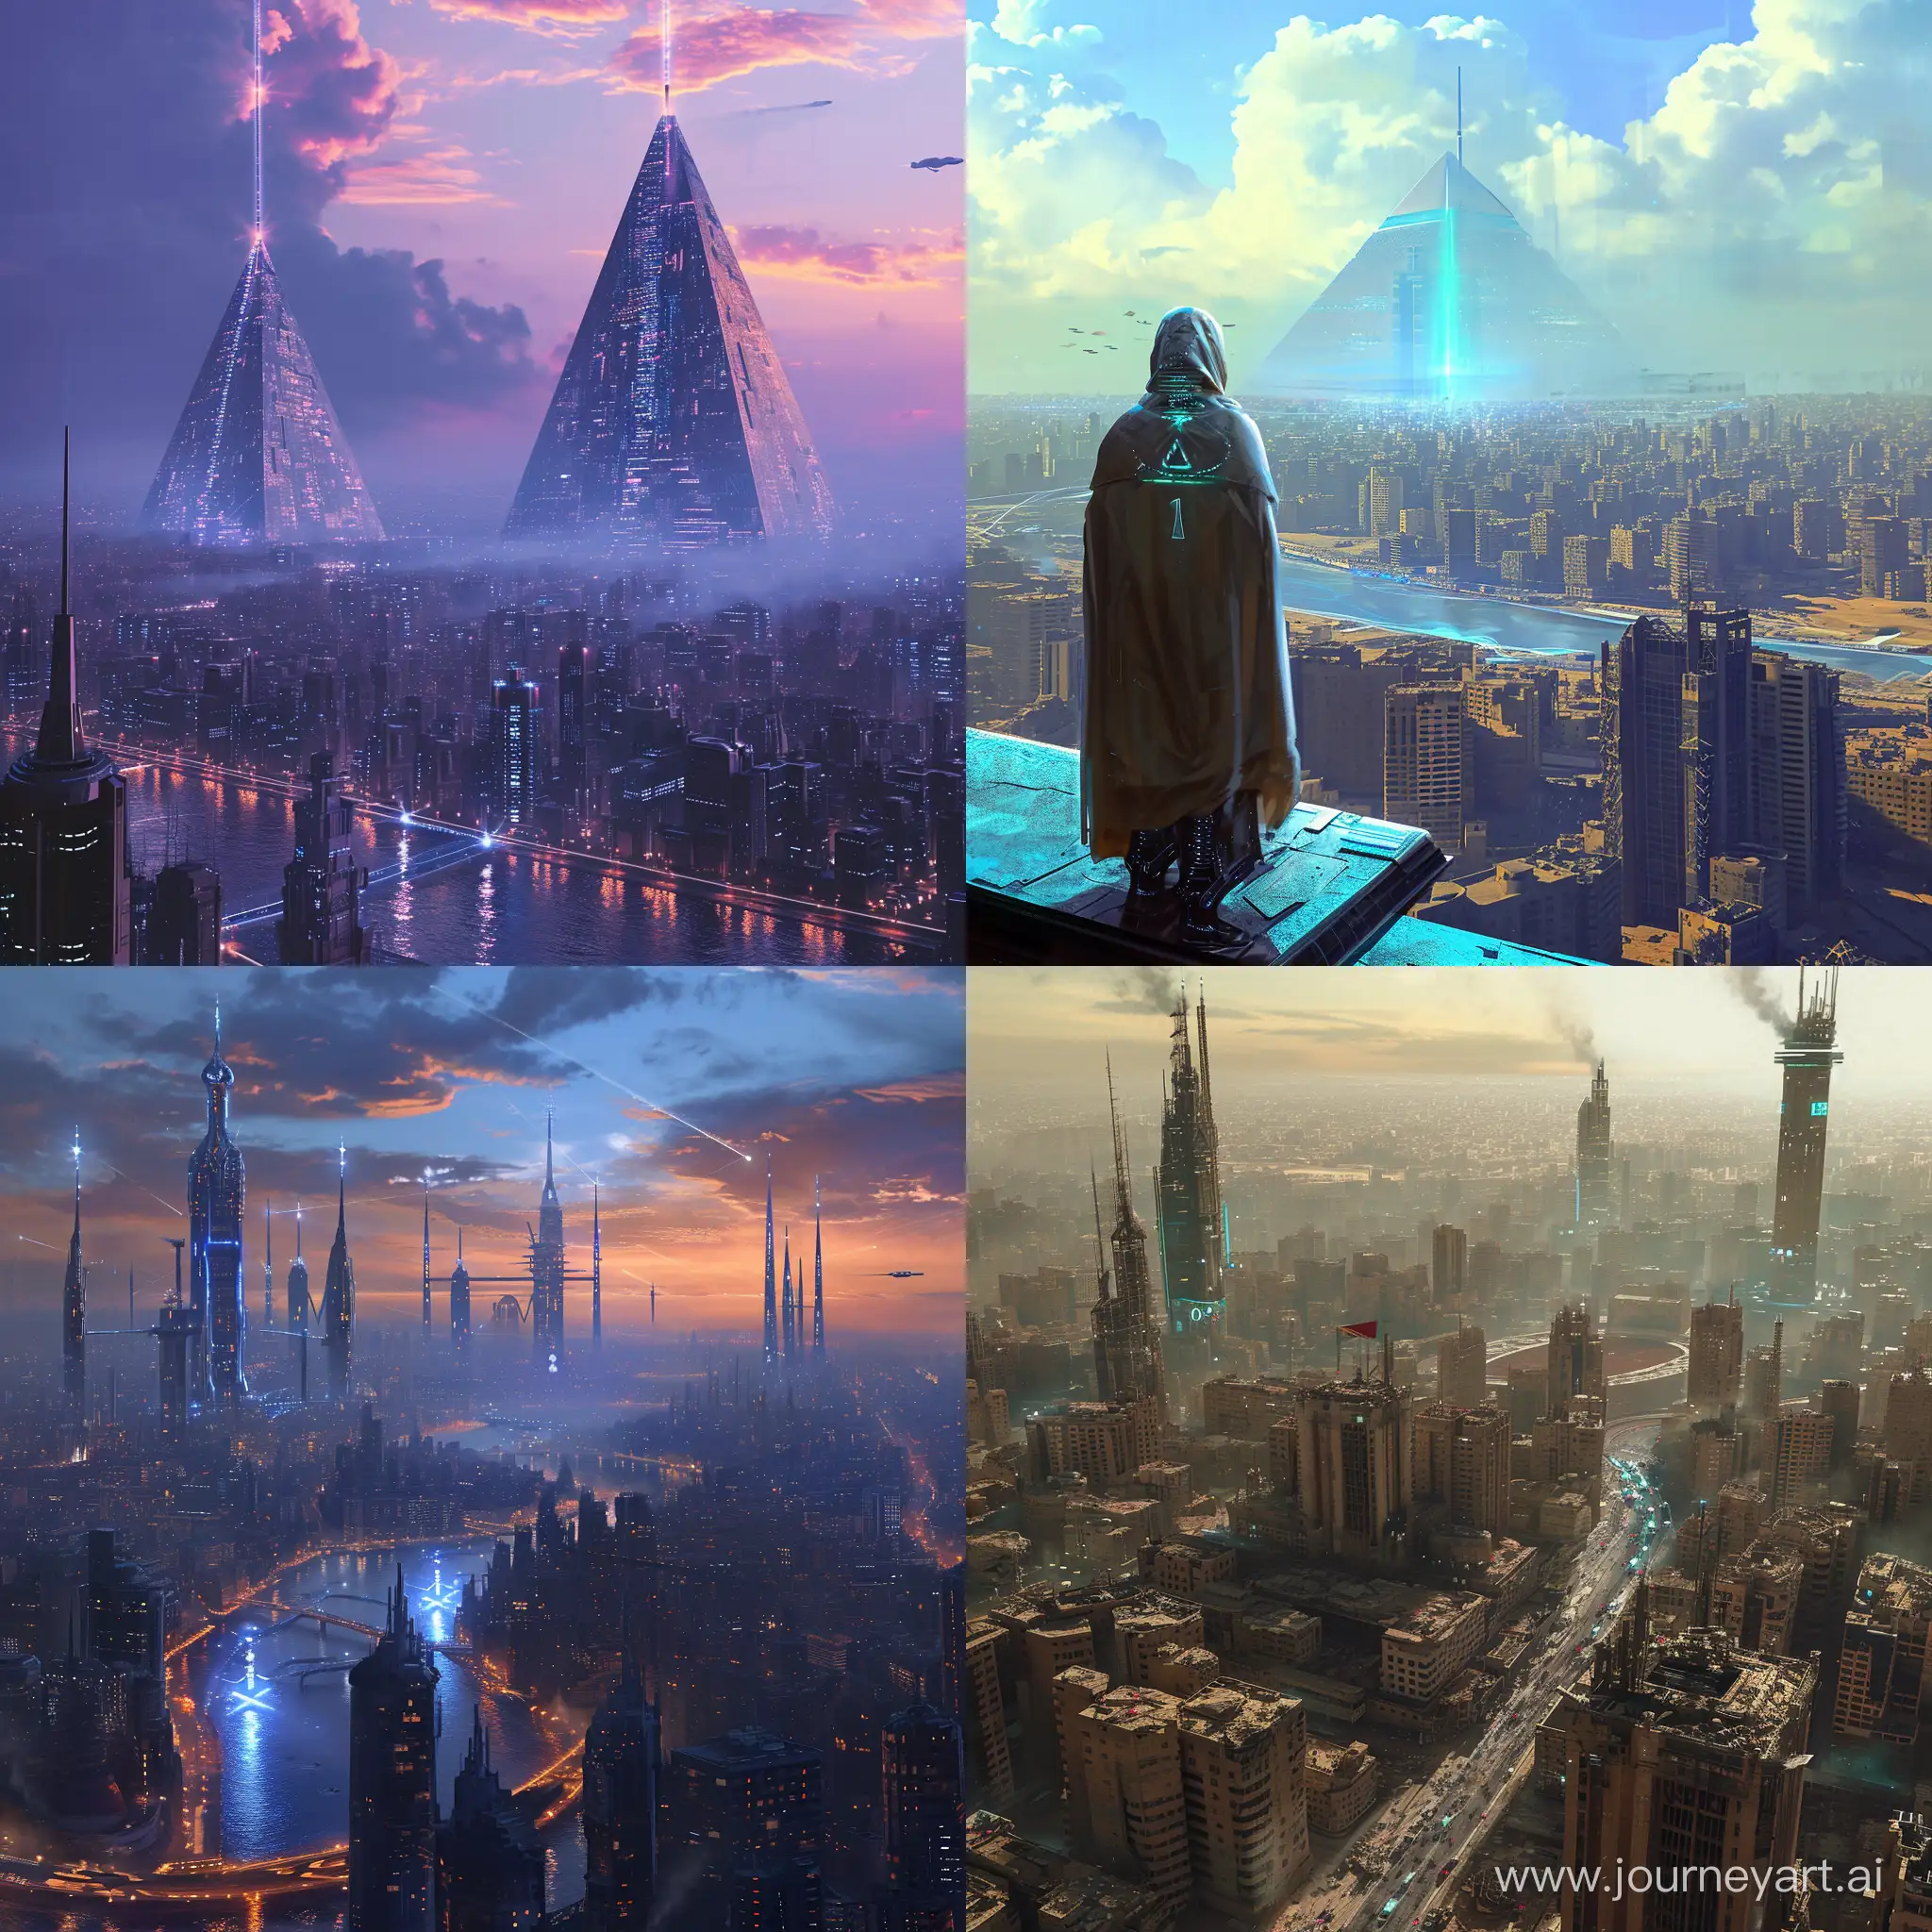 Futuristic-Cybernetic-Cairo-SciFi-Urban-Landscape-with-Upgraded-Technology